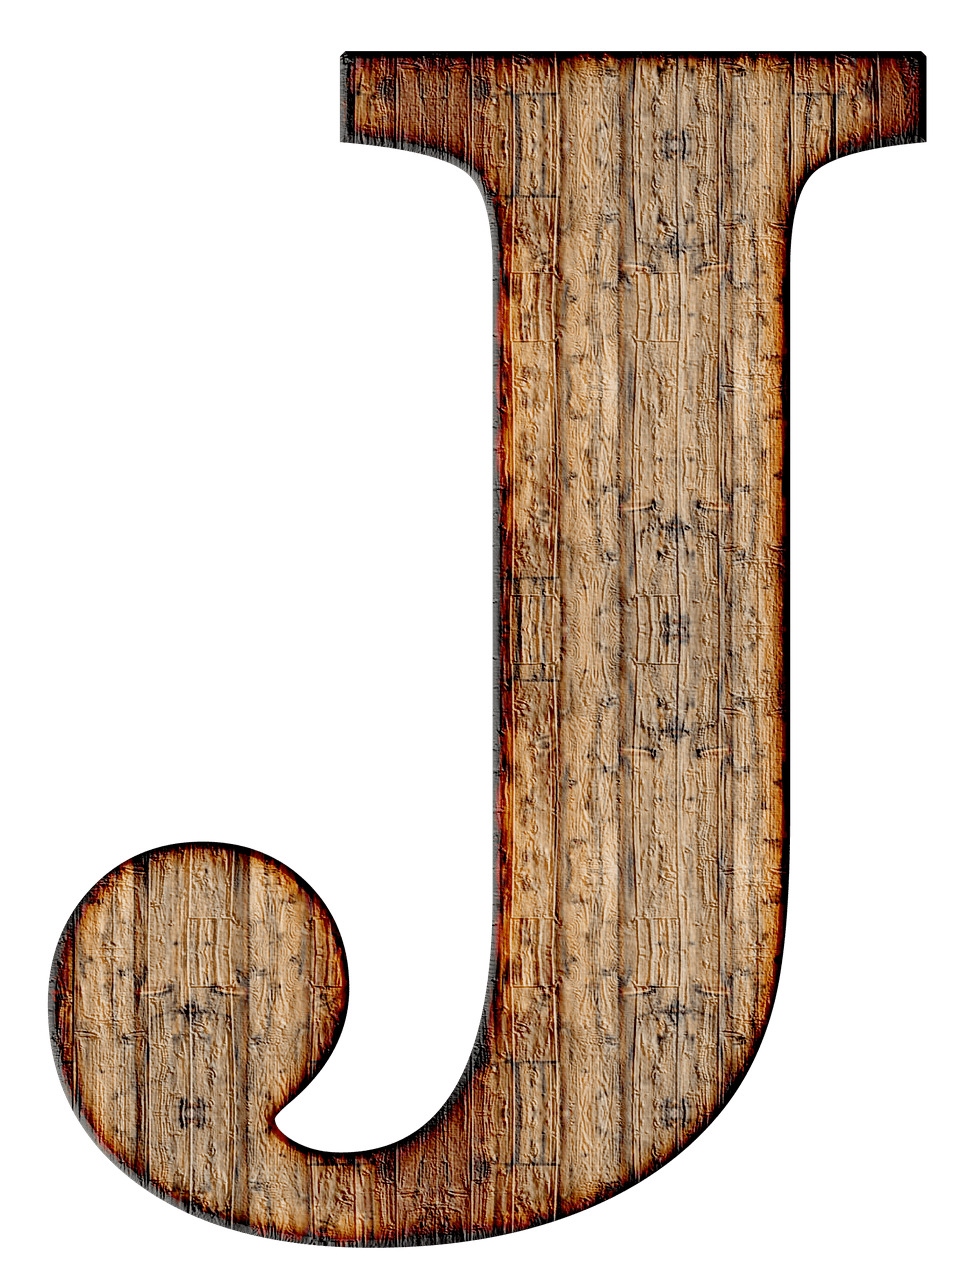 Wooden Capital Letter J icons